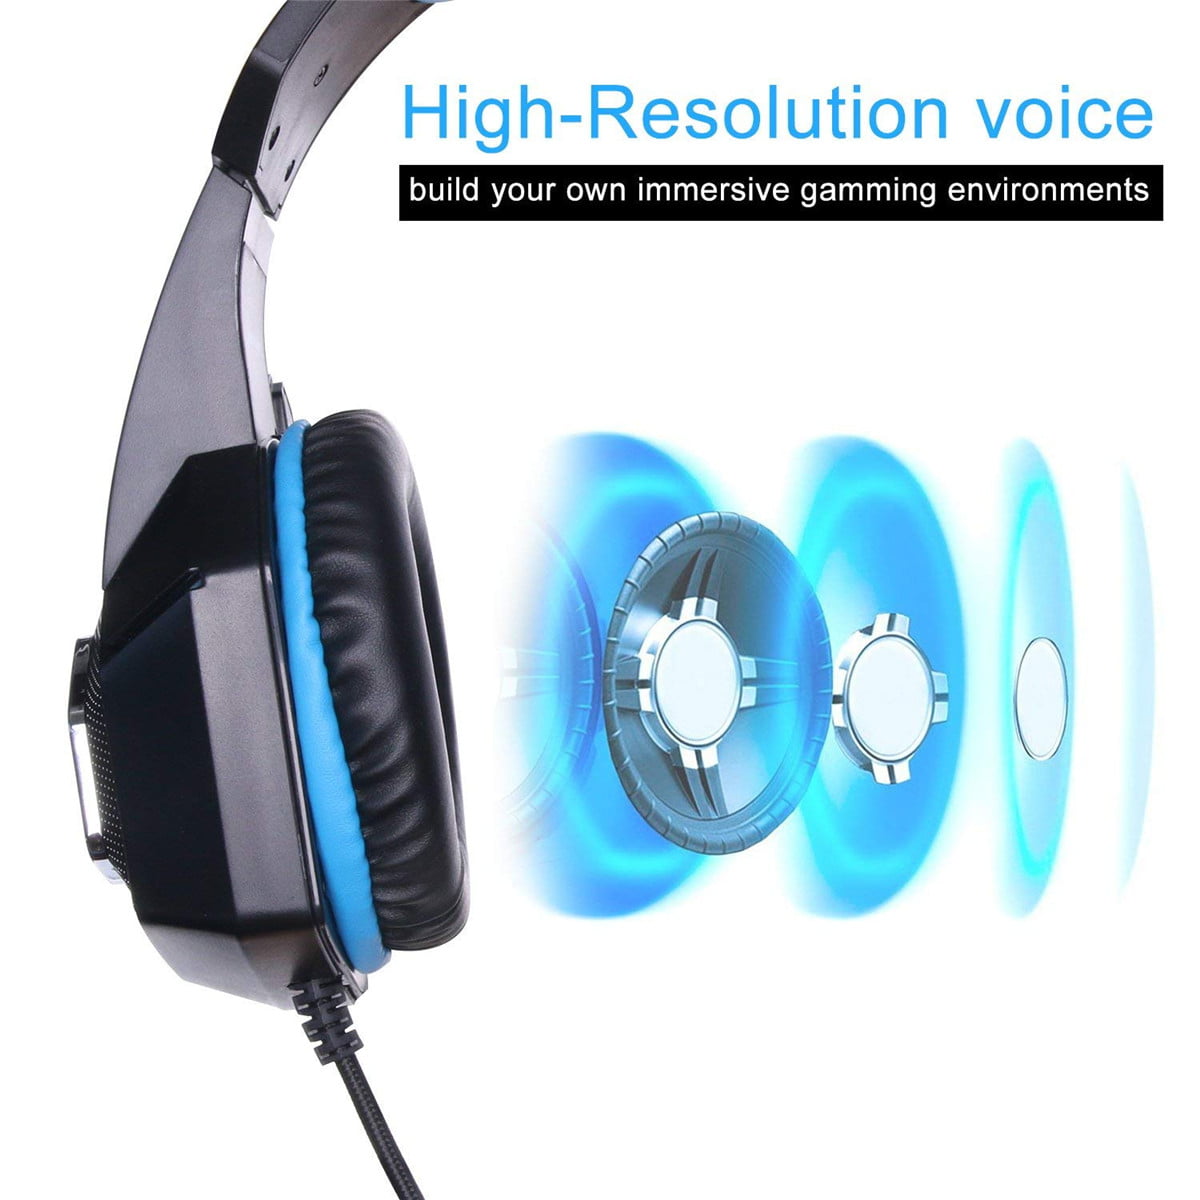 Gewend B olie Stadscentrum Hunterspider V1 Gaming Headset Best for Xbox One, PS4, PC - 7.1 Best  Surround Stereo Sound, Noise Cancelling Mic, 3.5mm Soft Breathing Over-Ear  Game Headphones - Walmart.com